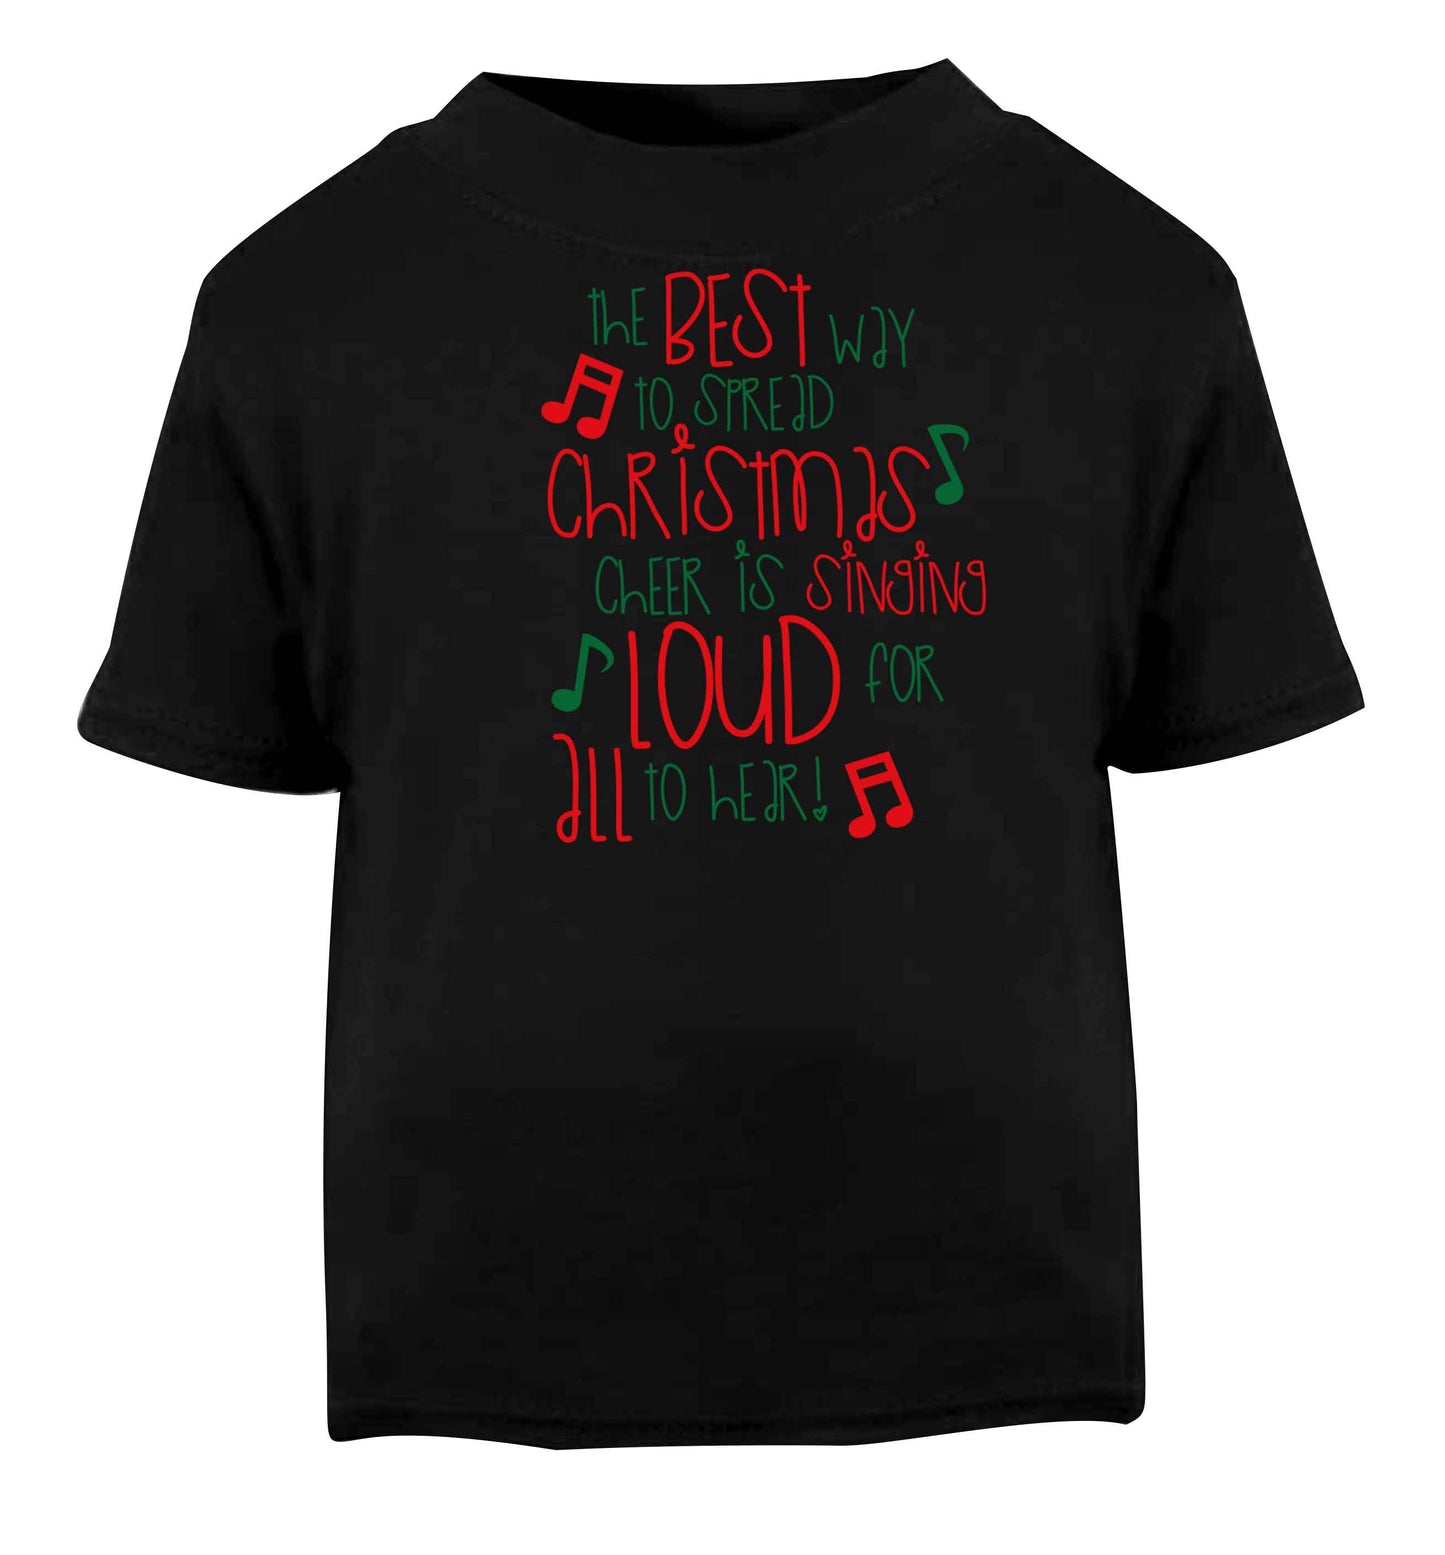 The best way to spread Christmas cheer is singing loud for all to hear Black baby toddler Tshirt 2 years